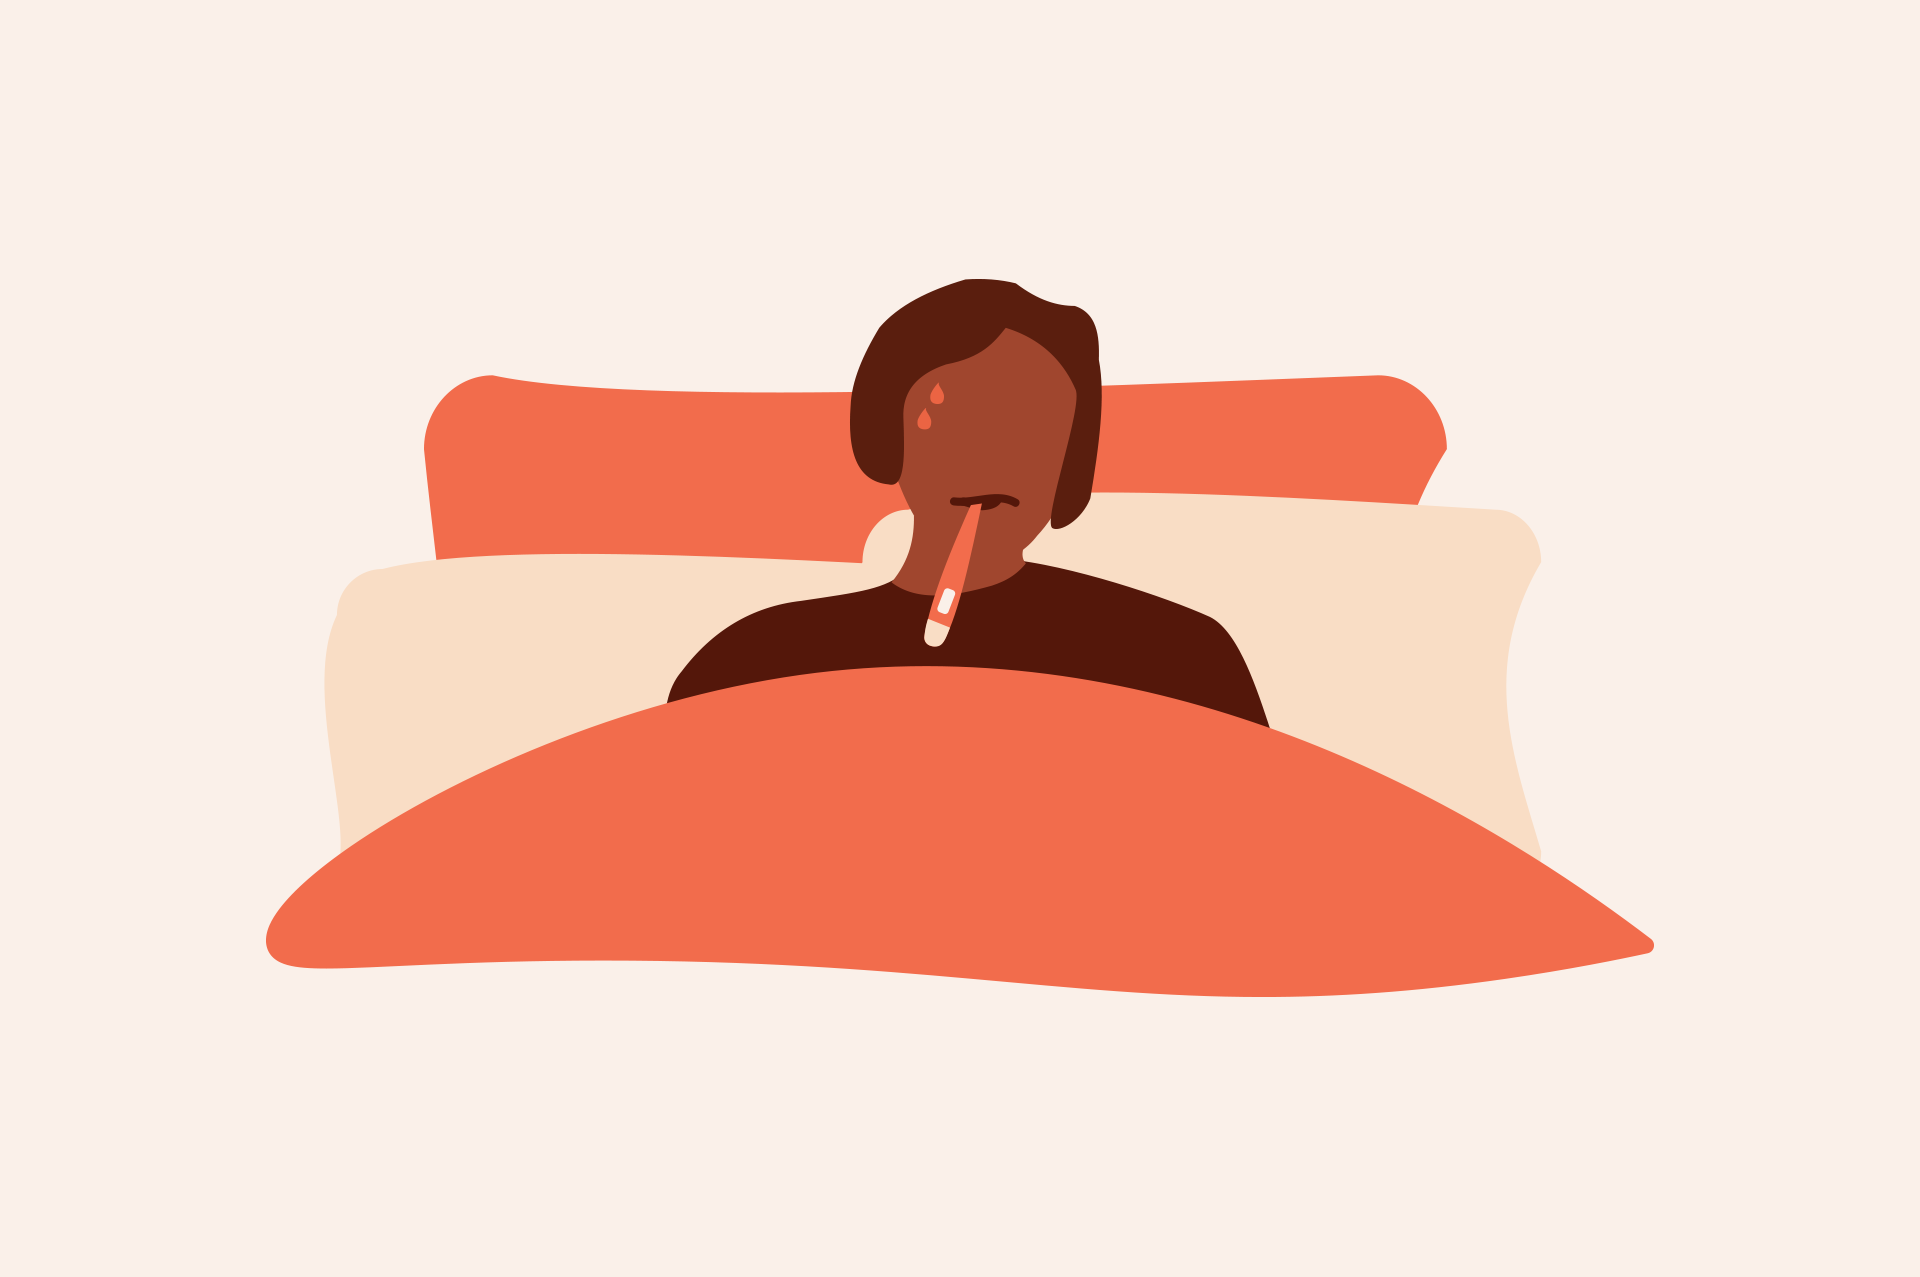 An illustration of a person lying in bed with a thermometer in their mouth